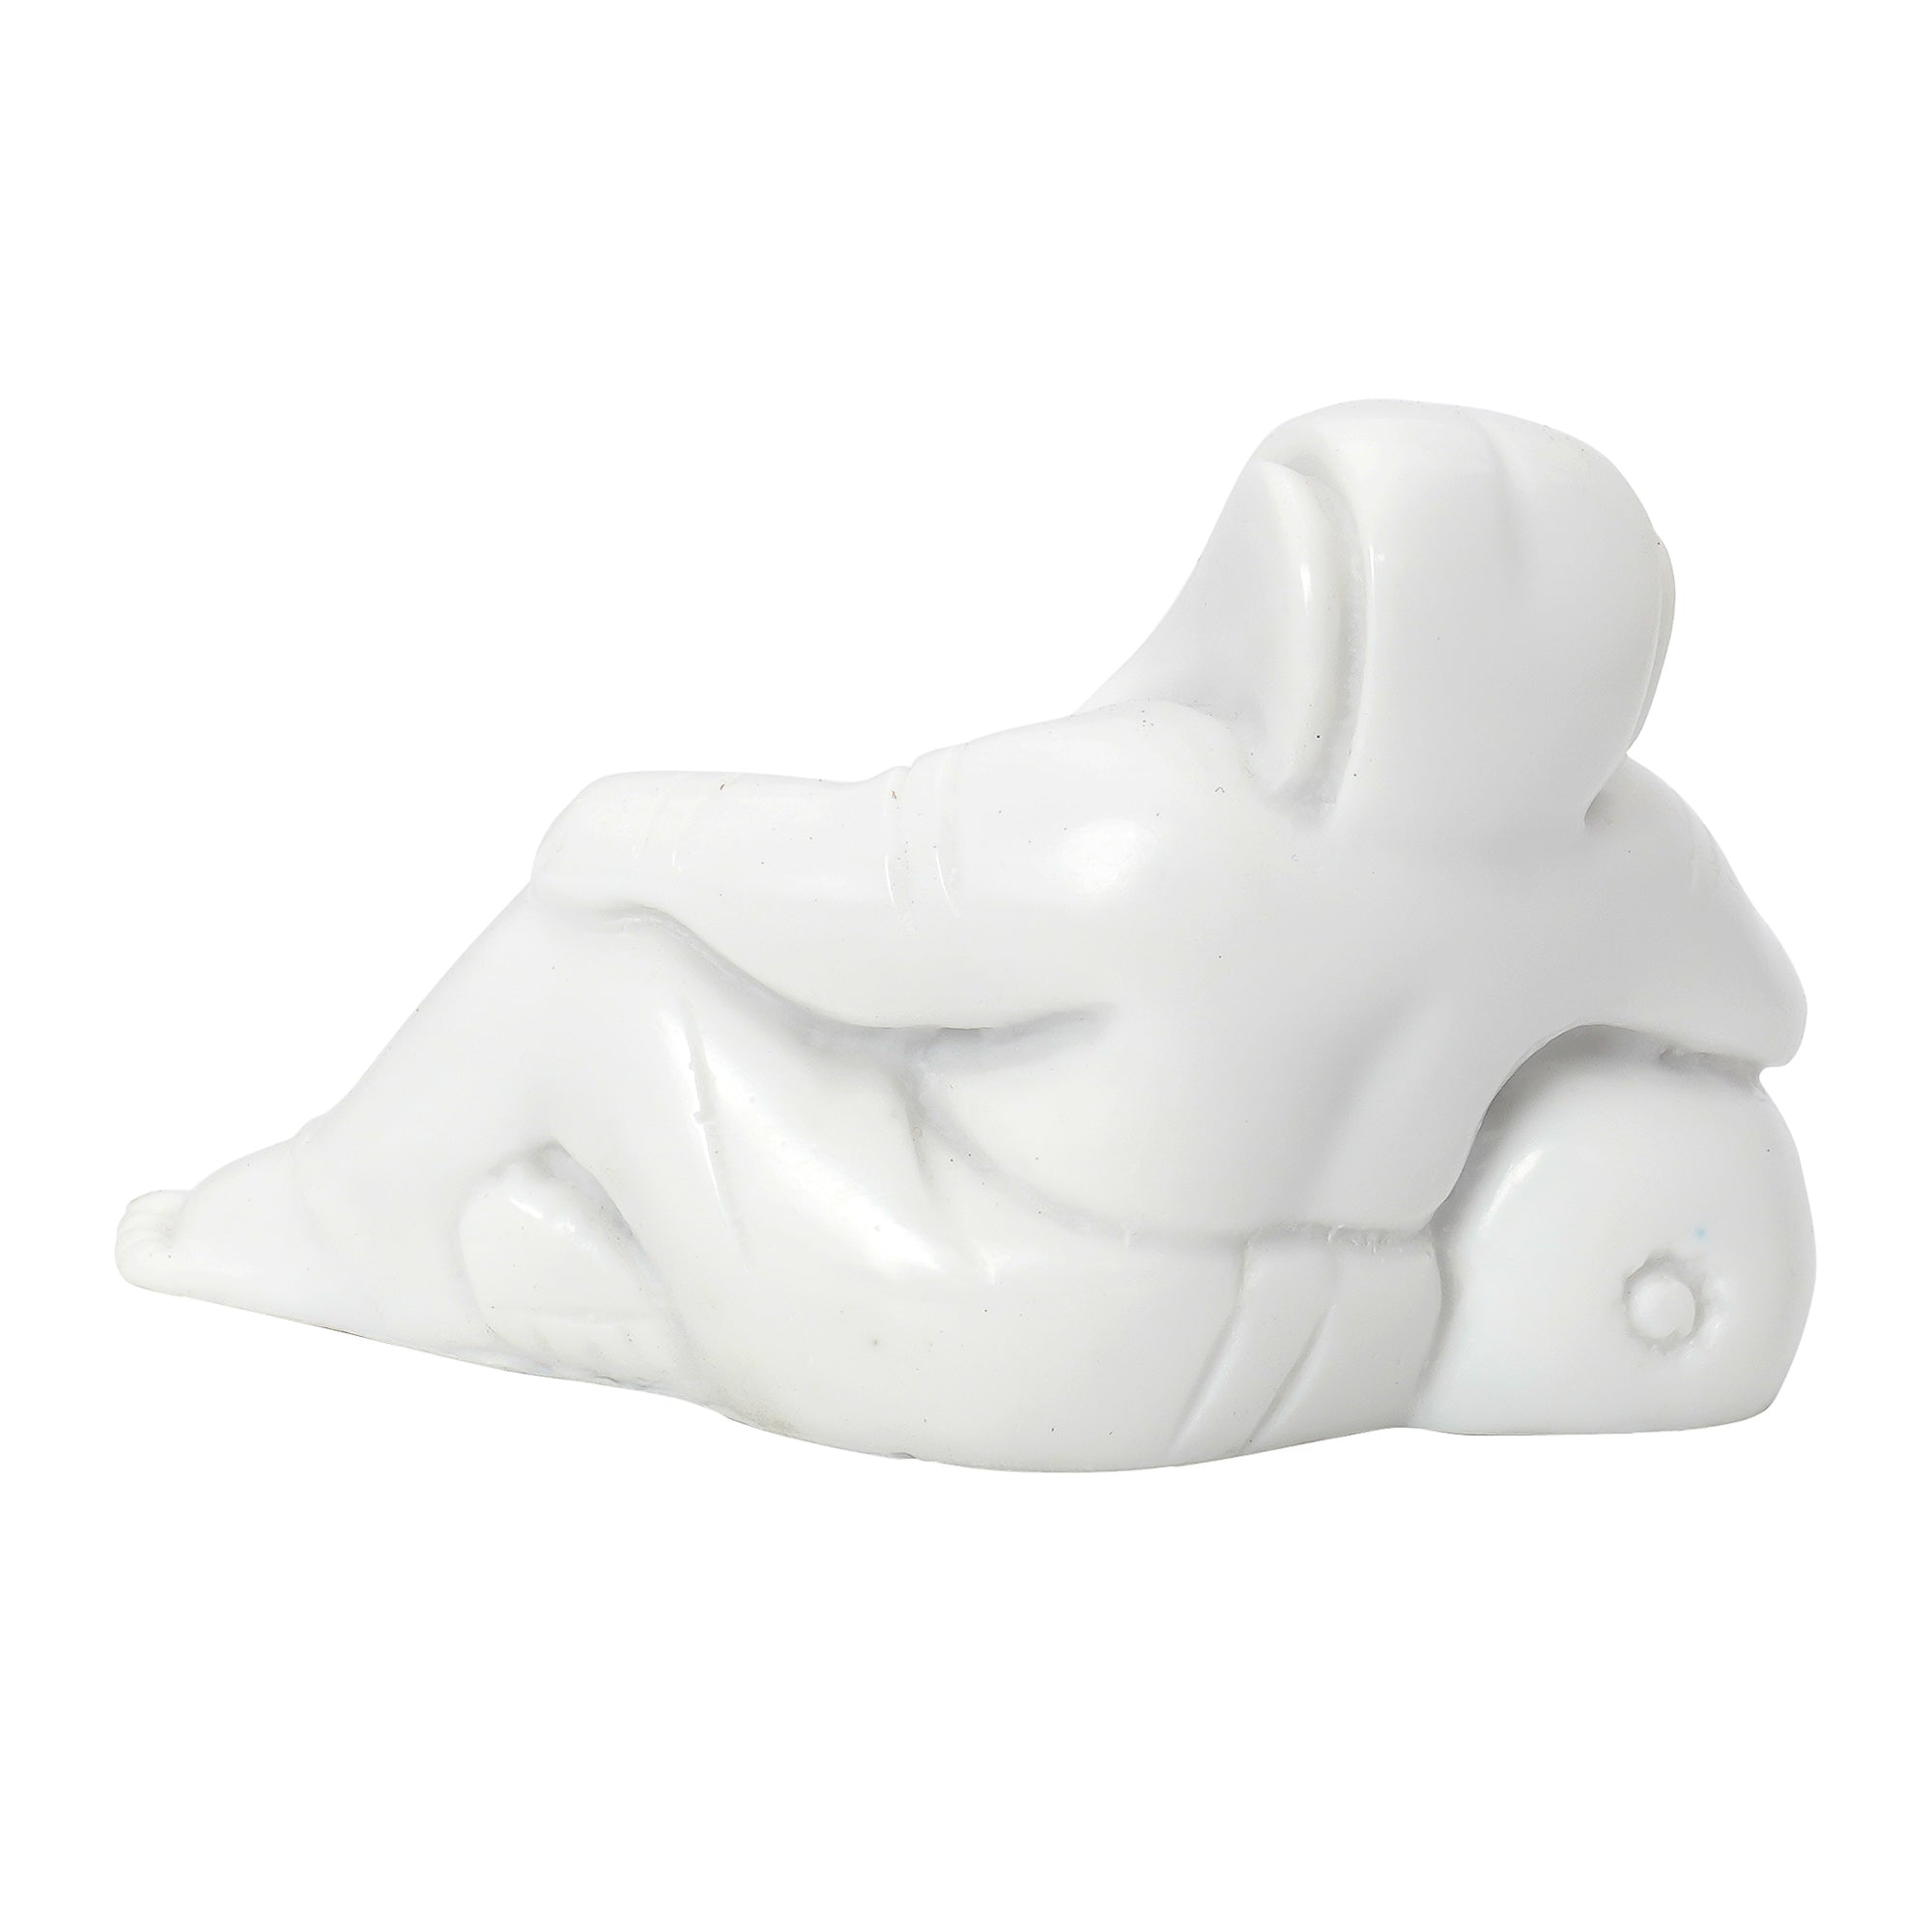 Pure White Resting Lord Ganesha Idol for Home/Temple/Office/Car Dashboard 6